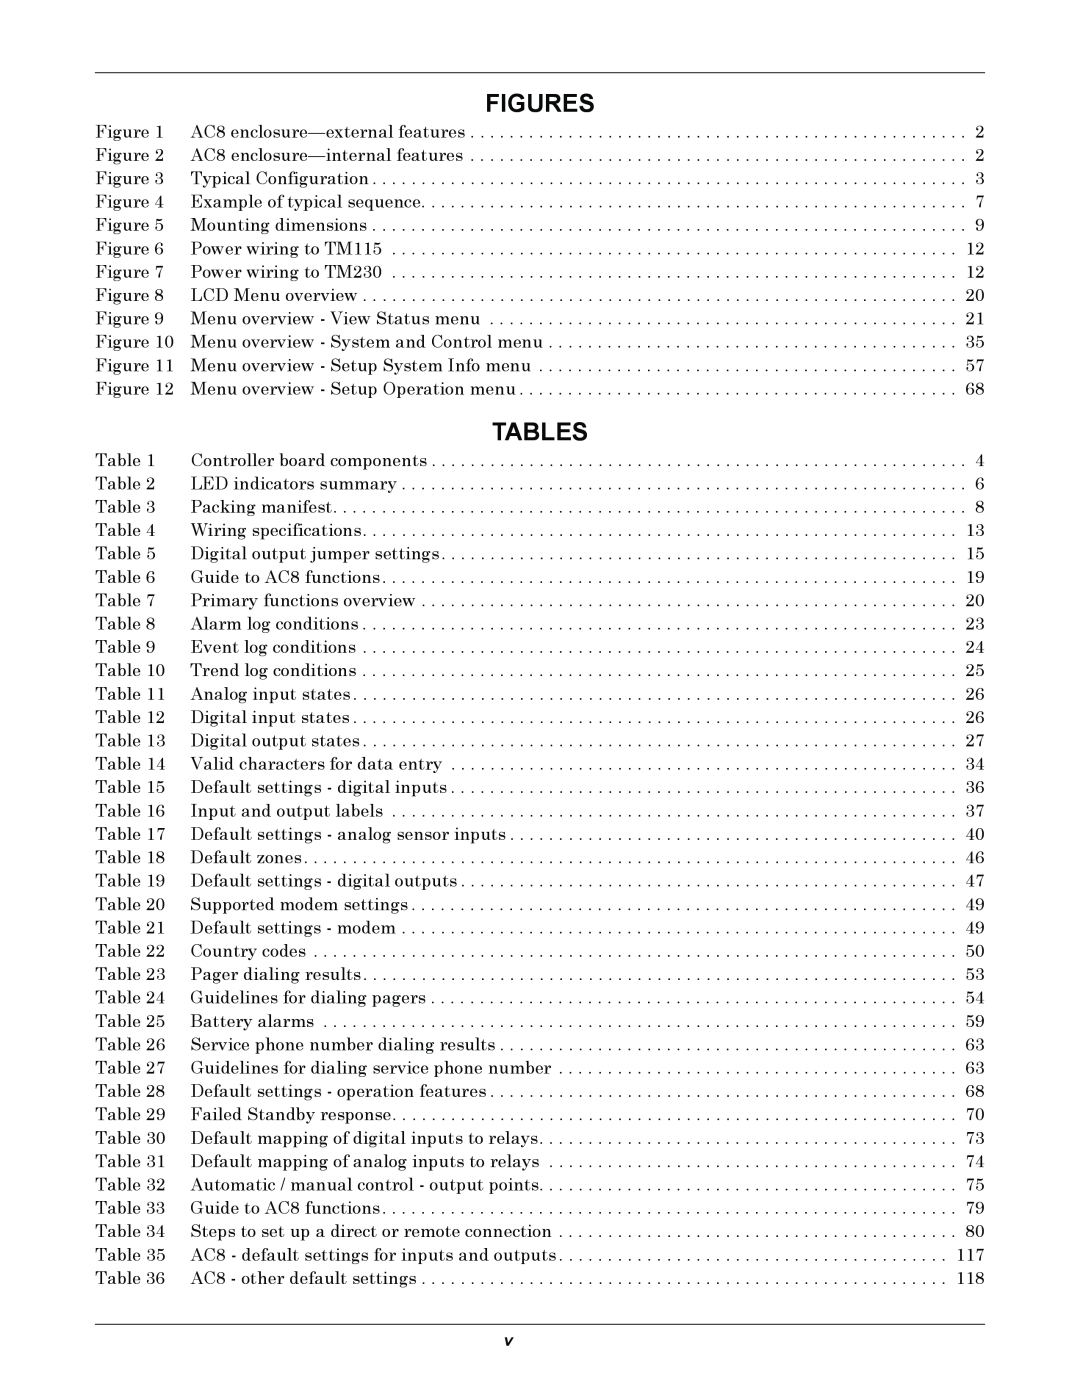 Emerson AC8 user manual Figures, Tables 